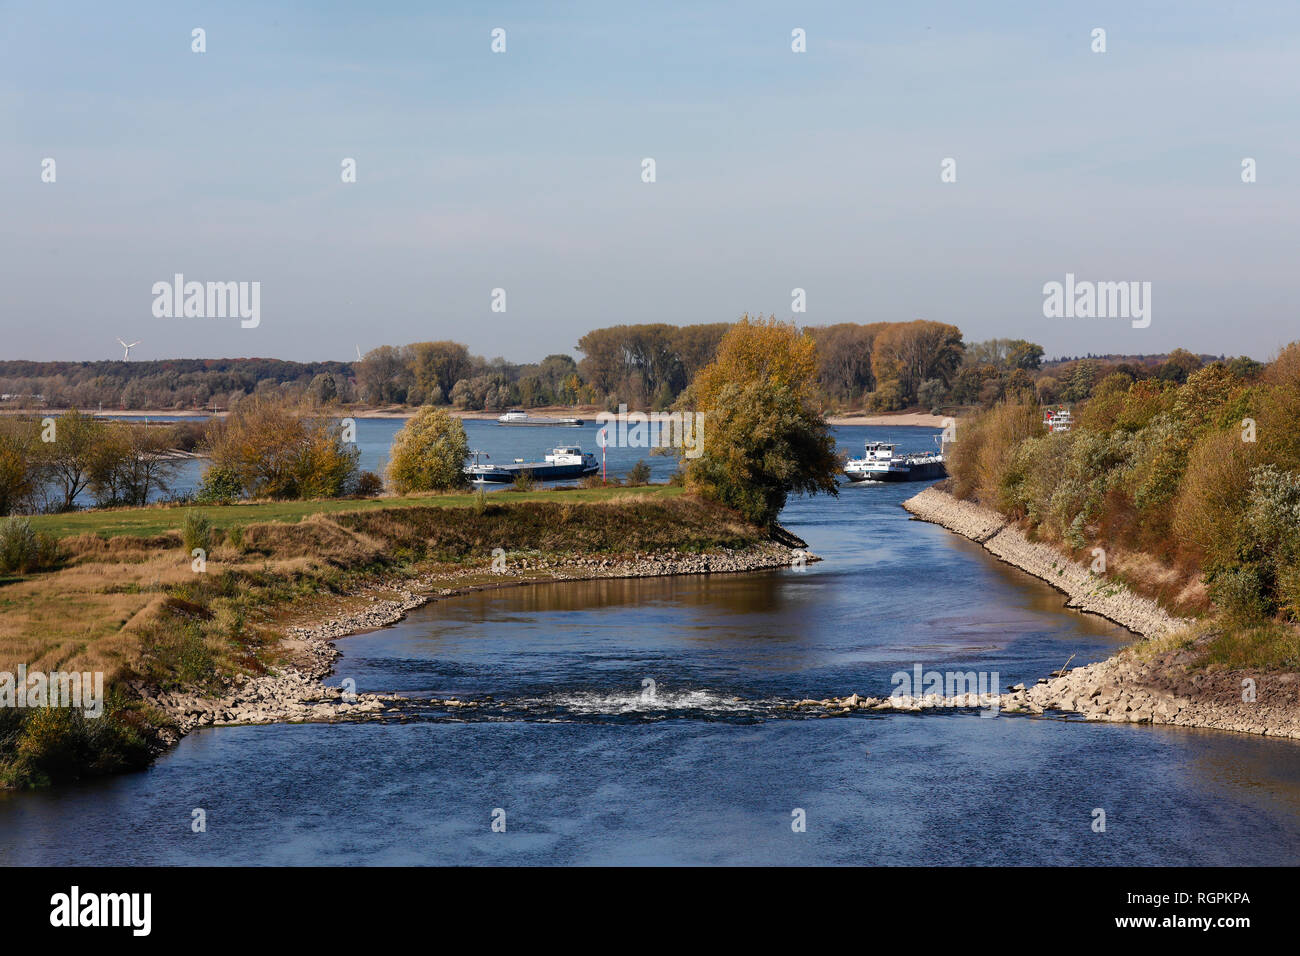 Wesel, North Rhine-Westphalia, Lower Rhine, Germany, Lippe, mouth of the river Lippe, view downstream on the mouth of the river Lippe into the Rhine.  Stock Photo